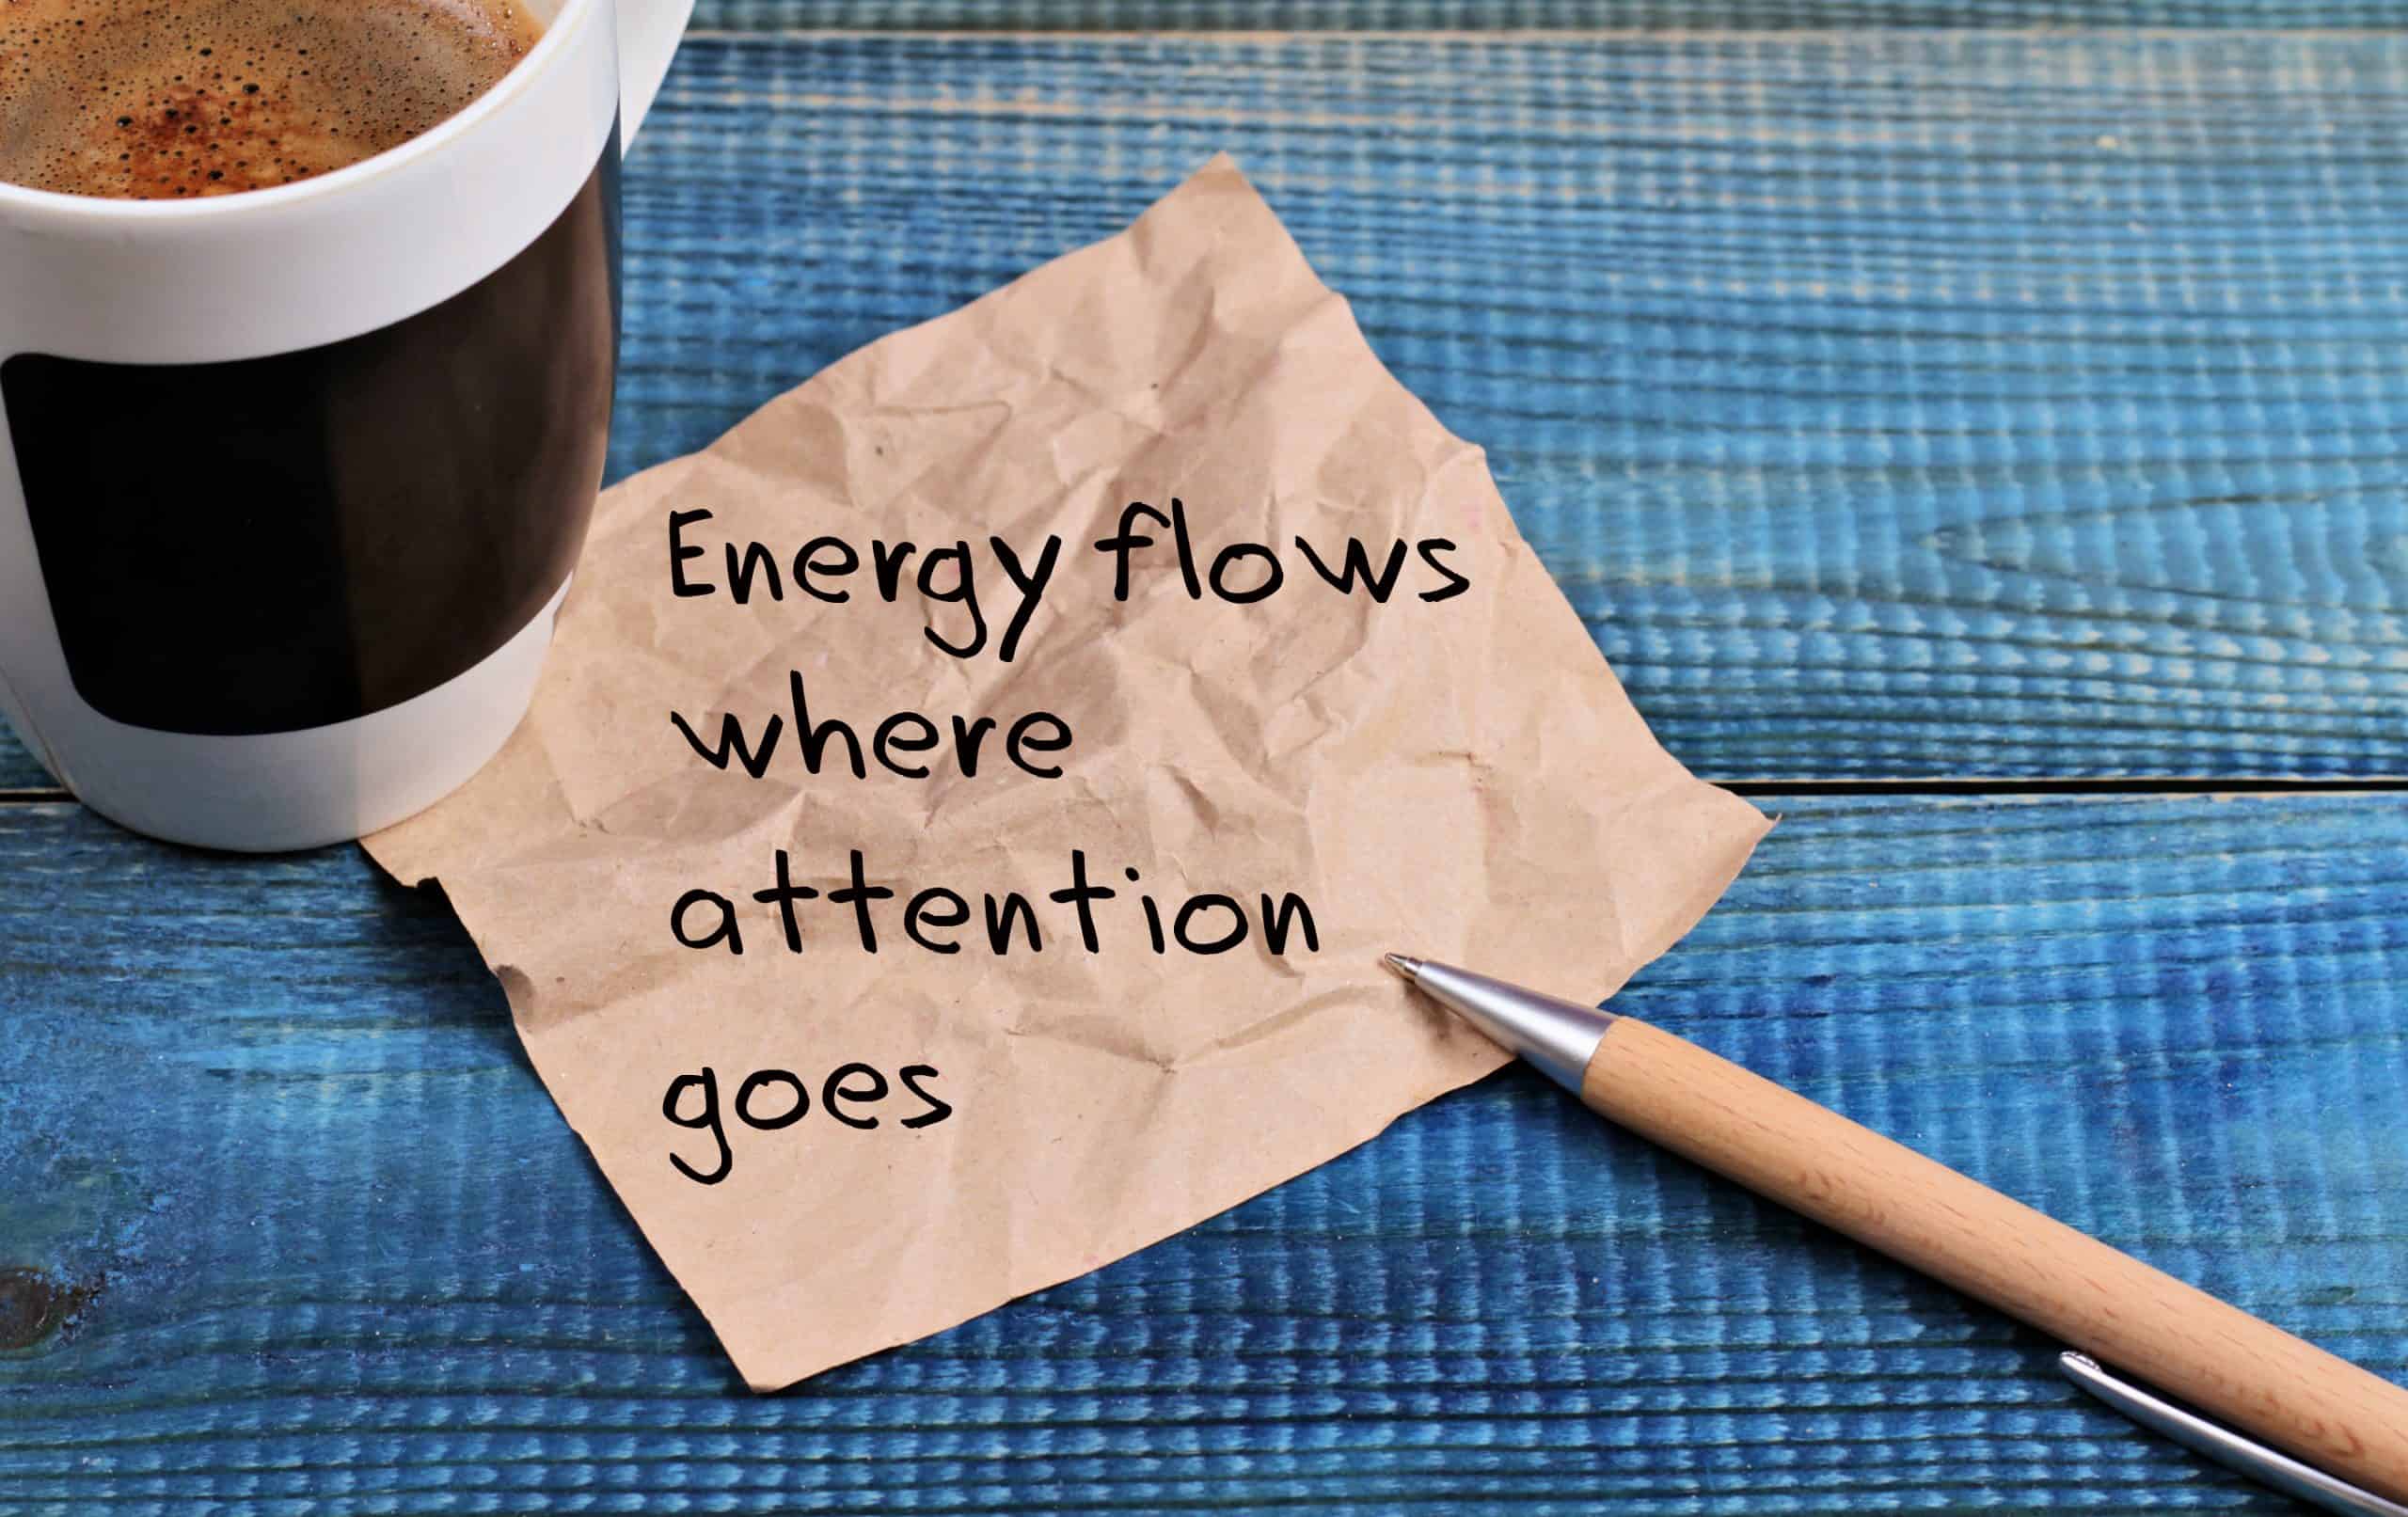 energy flows where attention goes on a blue wood table with coffee